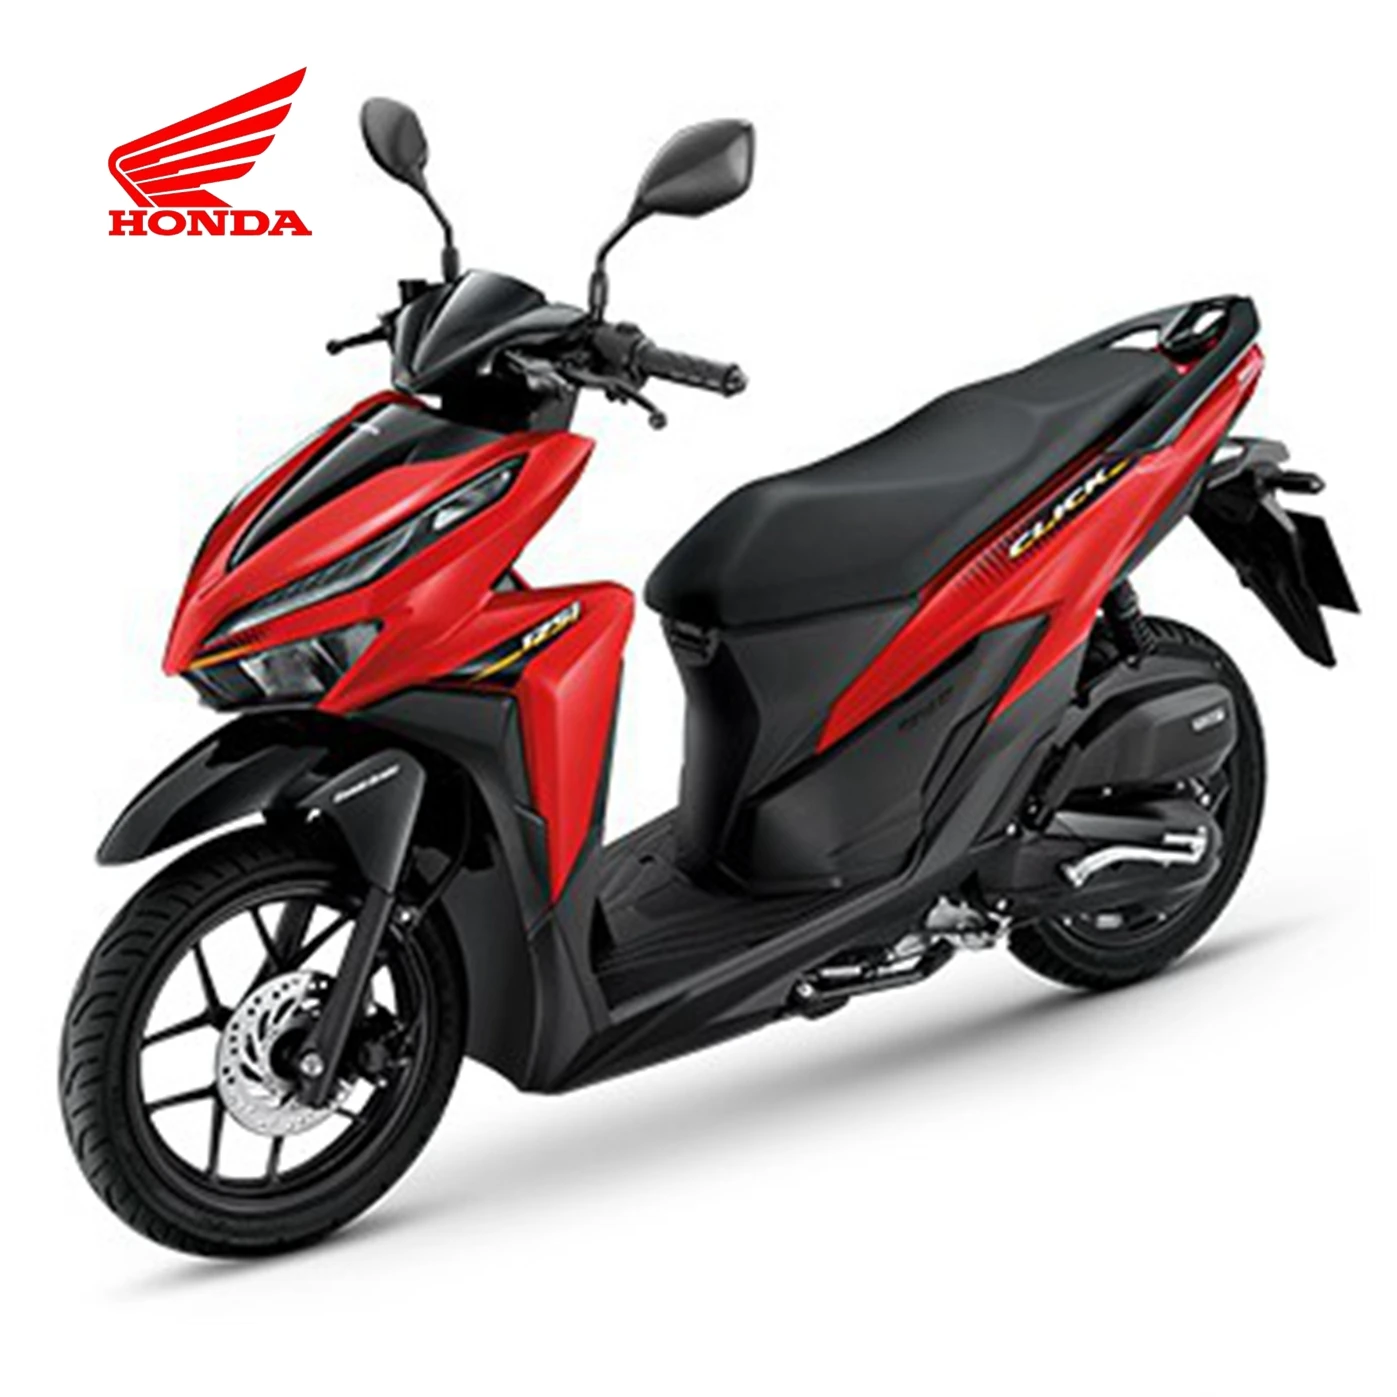 reservoir Controversieel Antagonist Hot Thailand Honda Click 125i Scooter Joylink, View Honda Motorcycle, Honda  Product Details from JOYLINK ASIA LIMITED on Alibaba.com